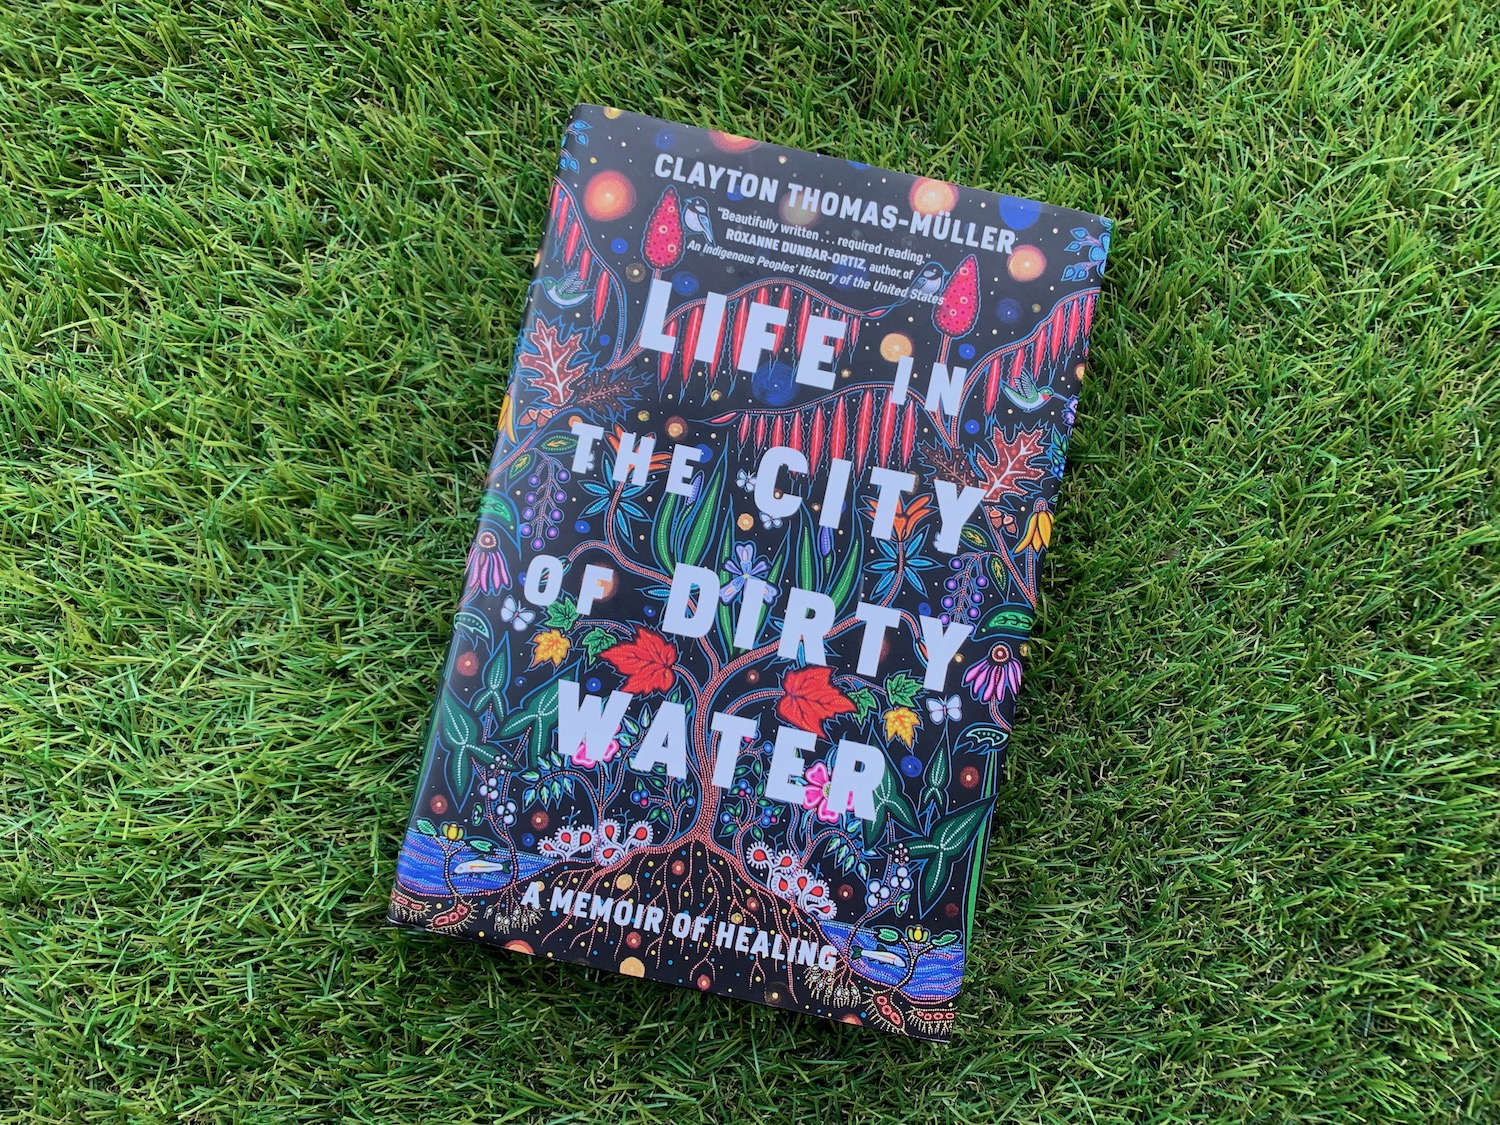 The book "Life in the City of Dirty Water" sits on top of a grass-looking rug.